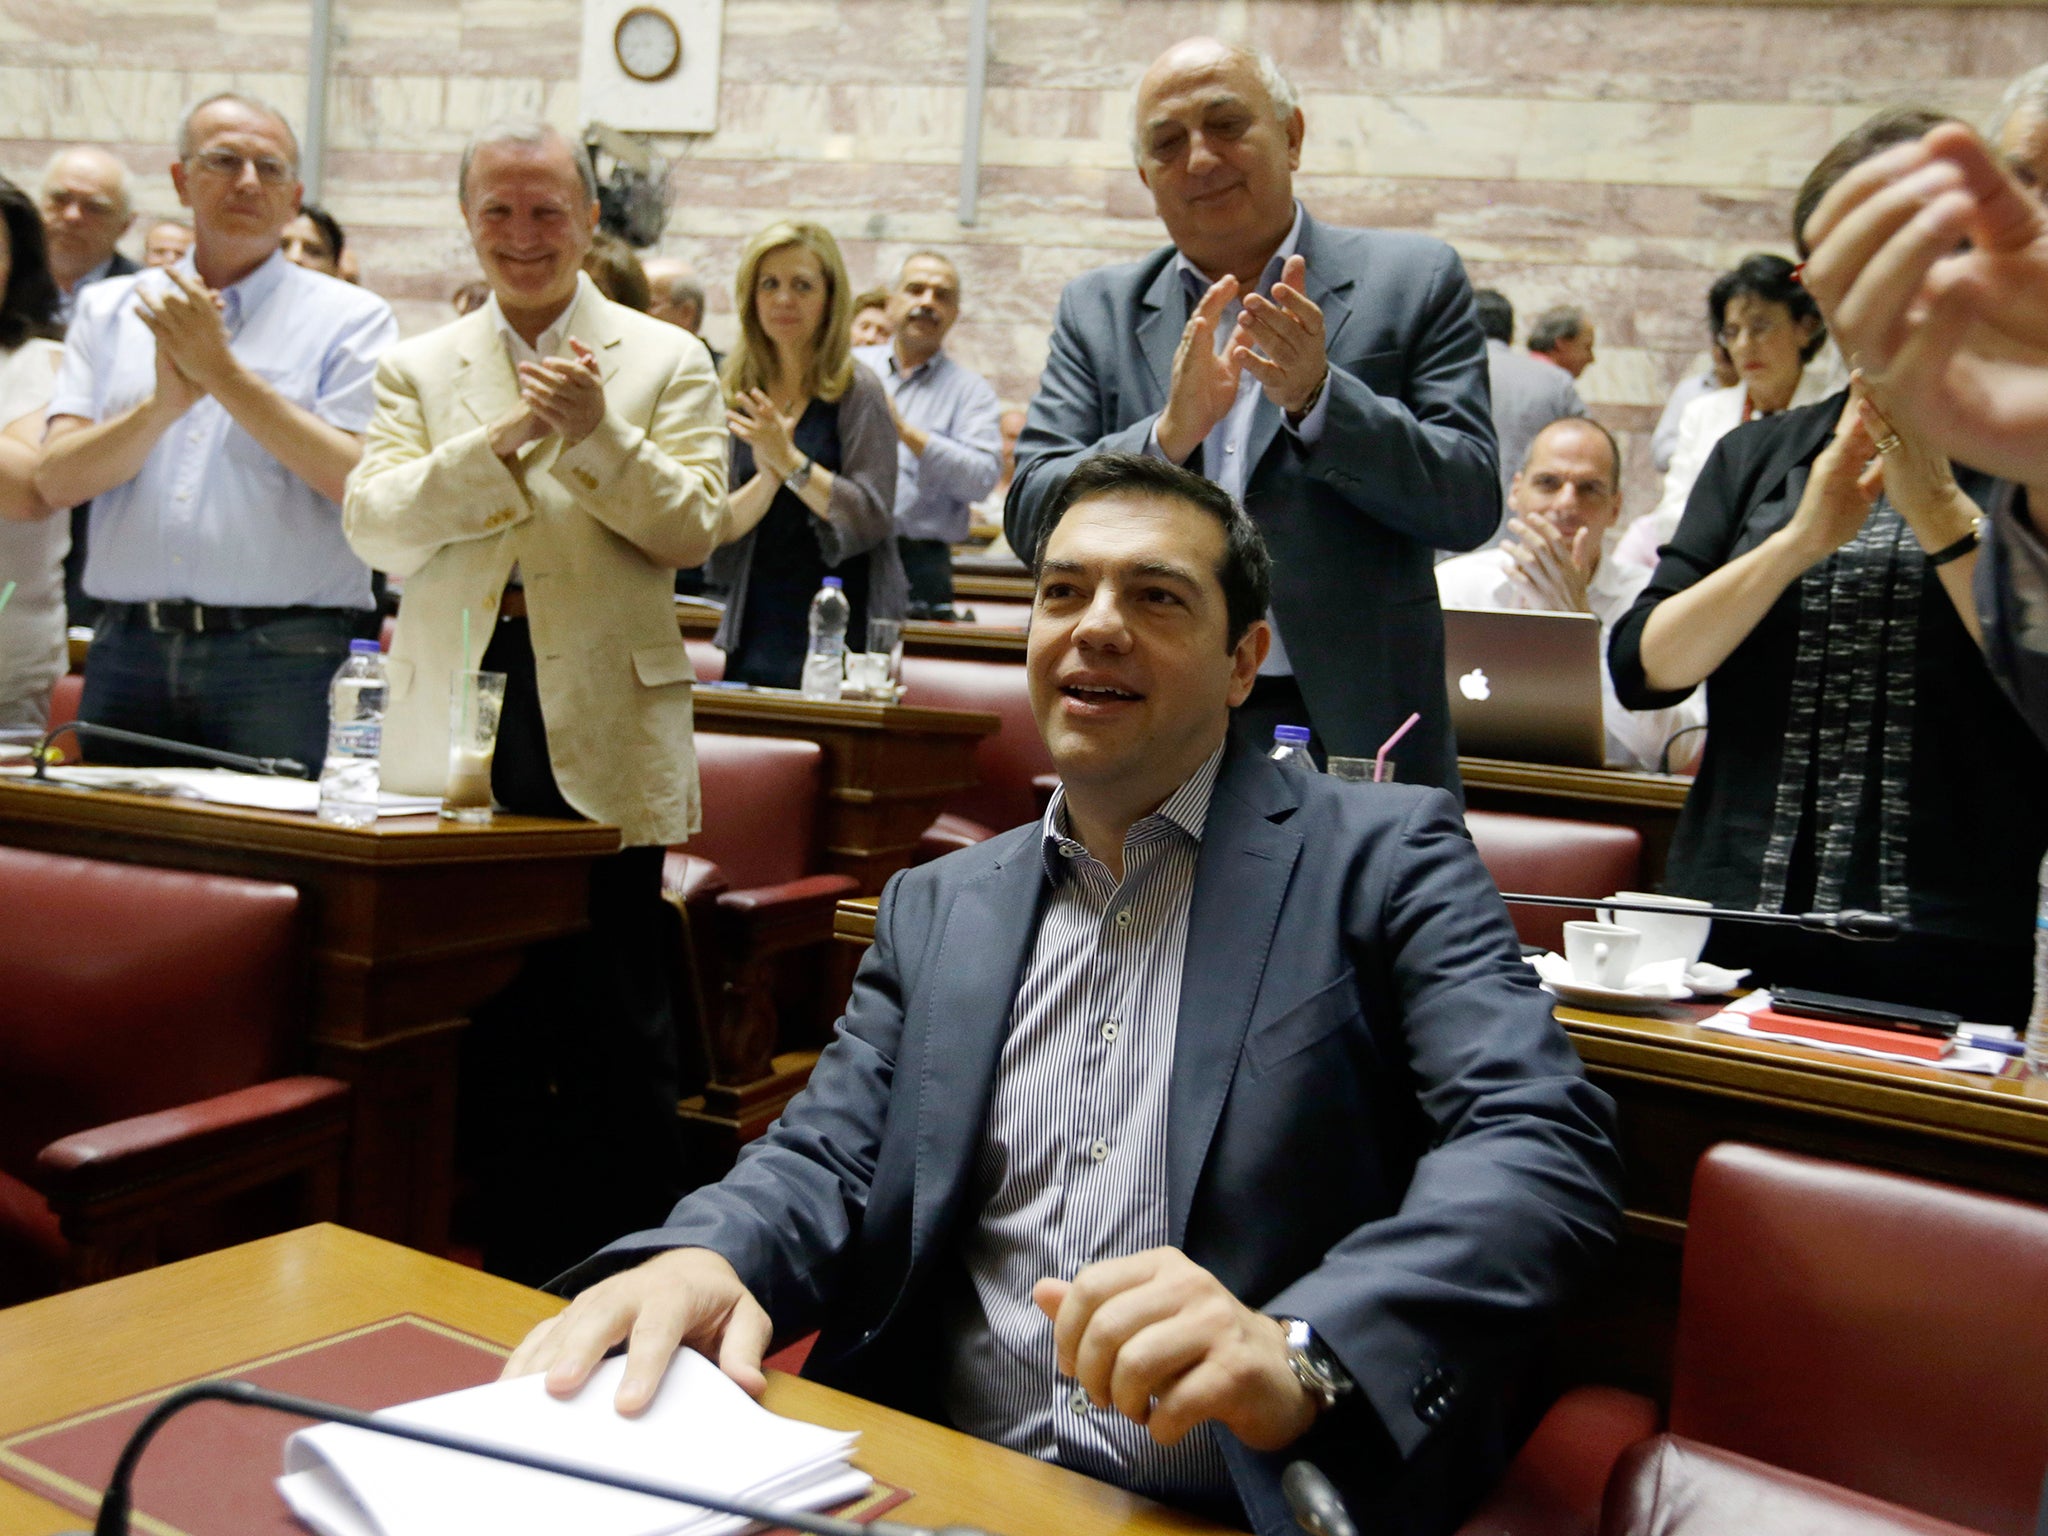 Greece's Prime Minister Alexis Tsipras a meeting as his lawmakers of Syriza party applaud him at the Greek Parliament in Athens